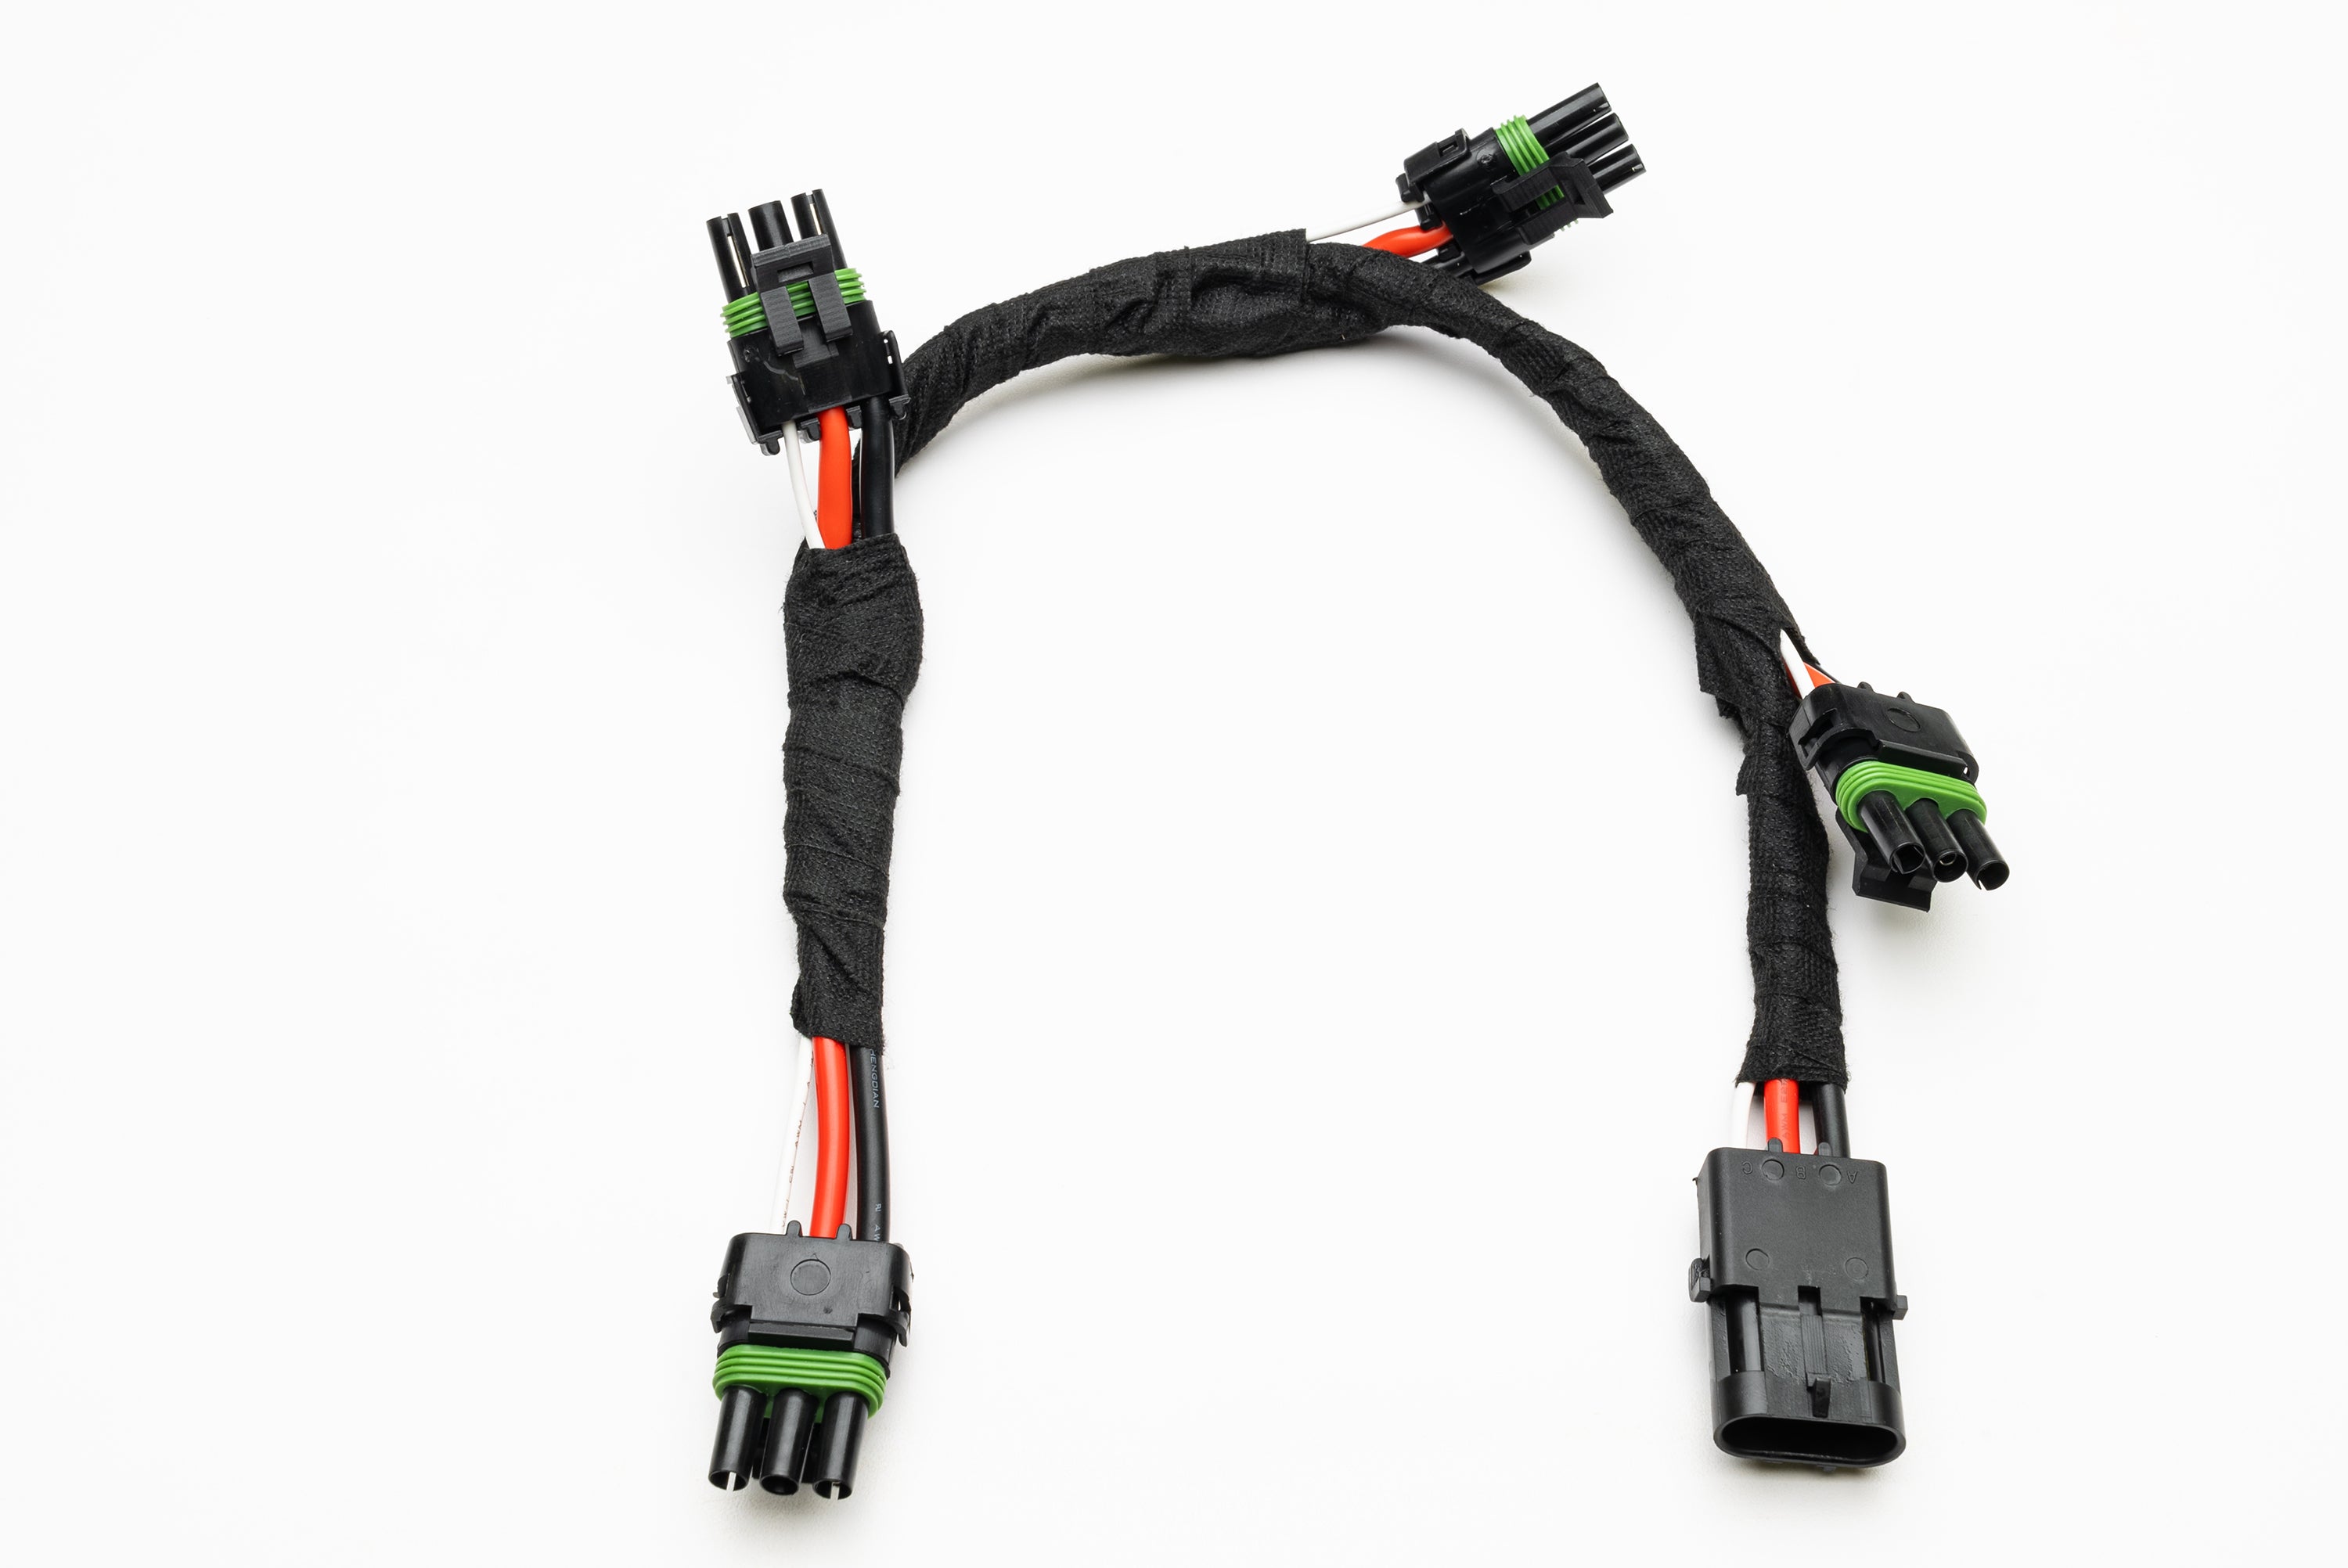 4X 3 Pole HD Chain Harness Splitter add on - SPV Harness System (Works with MANY vehicles, See Details)